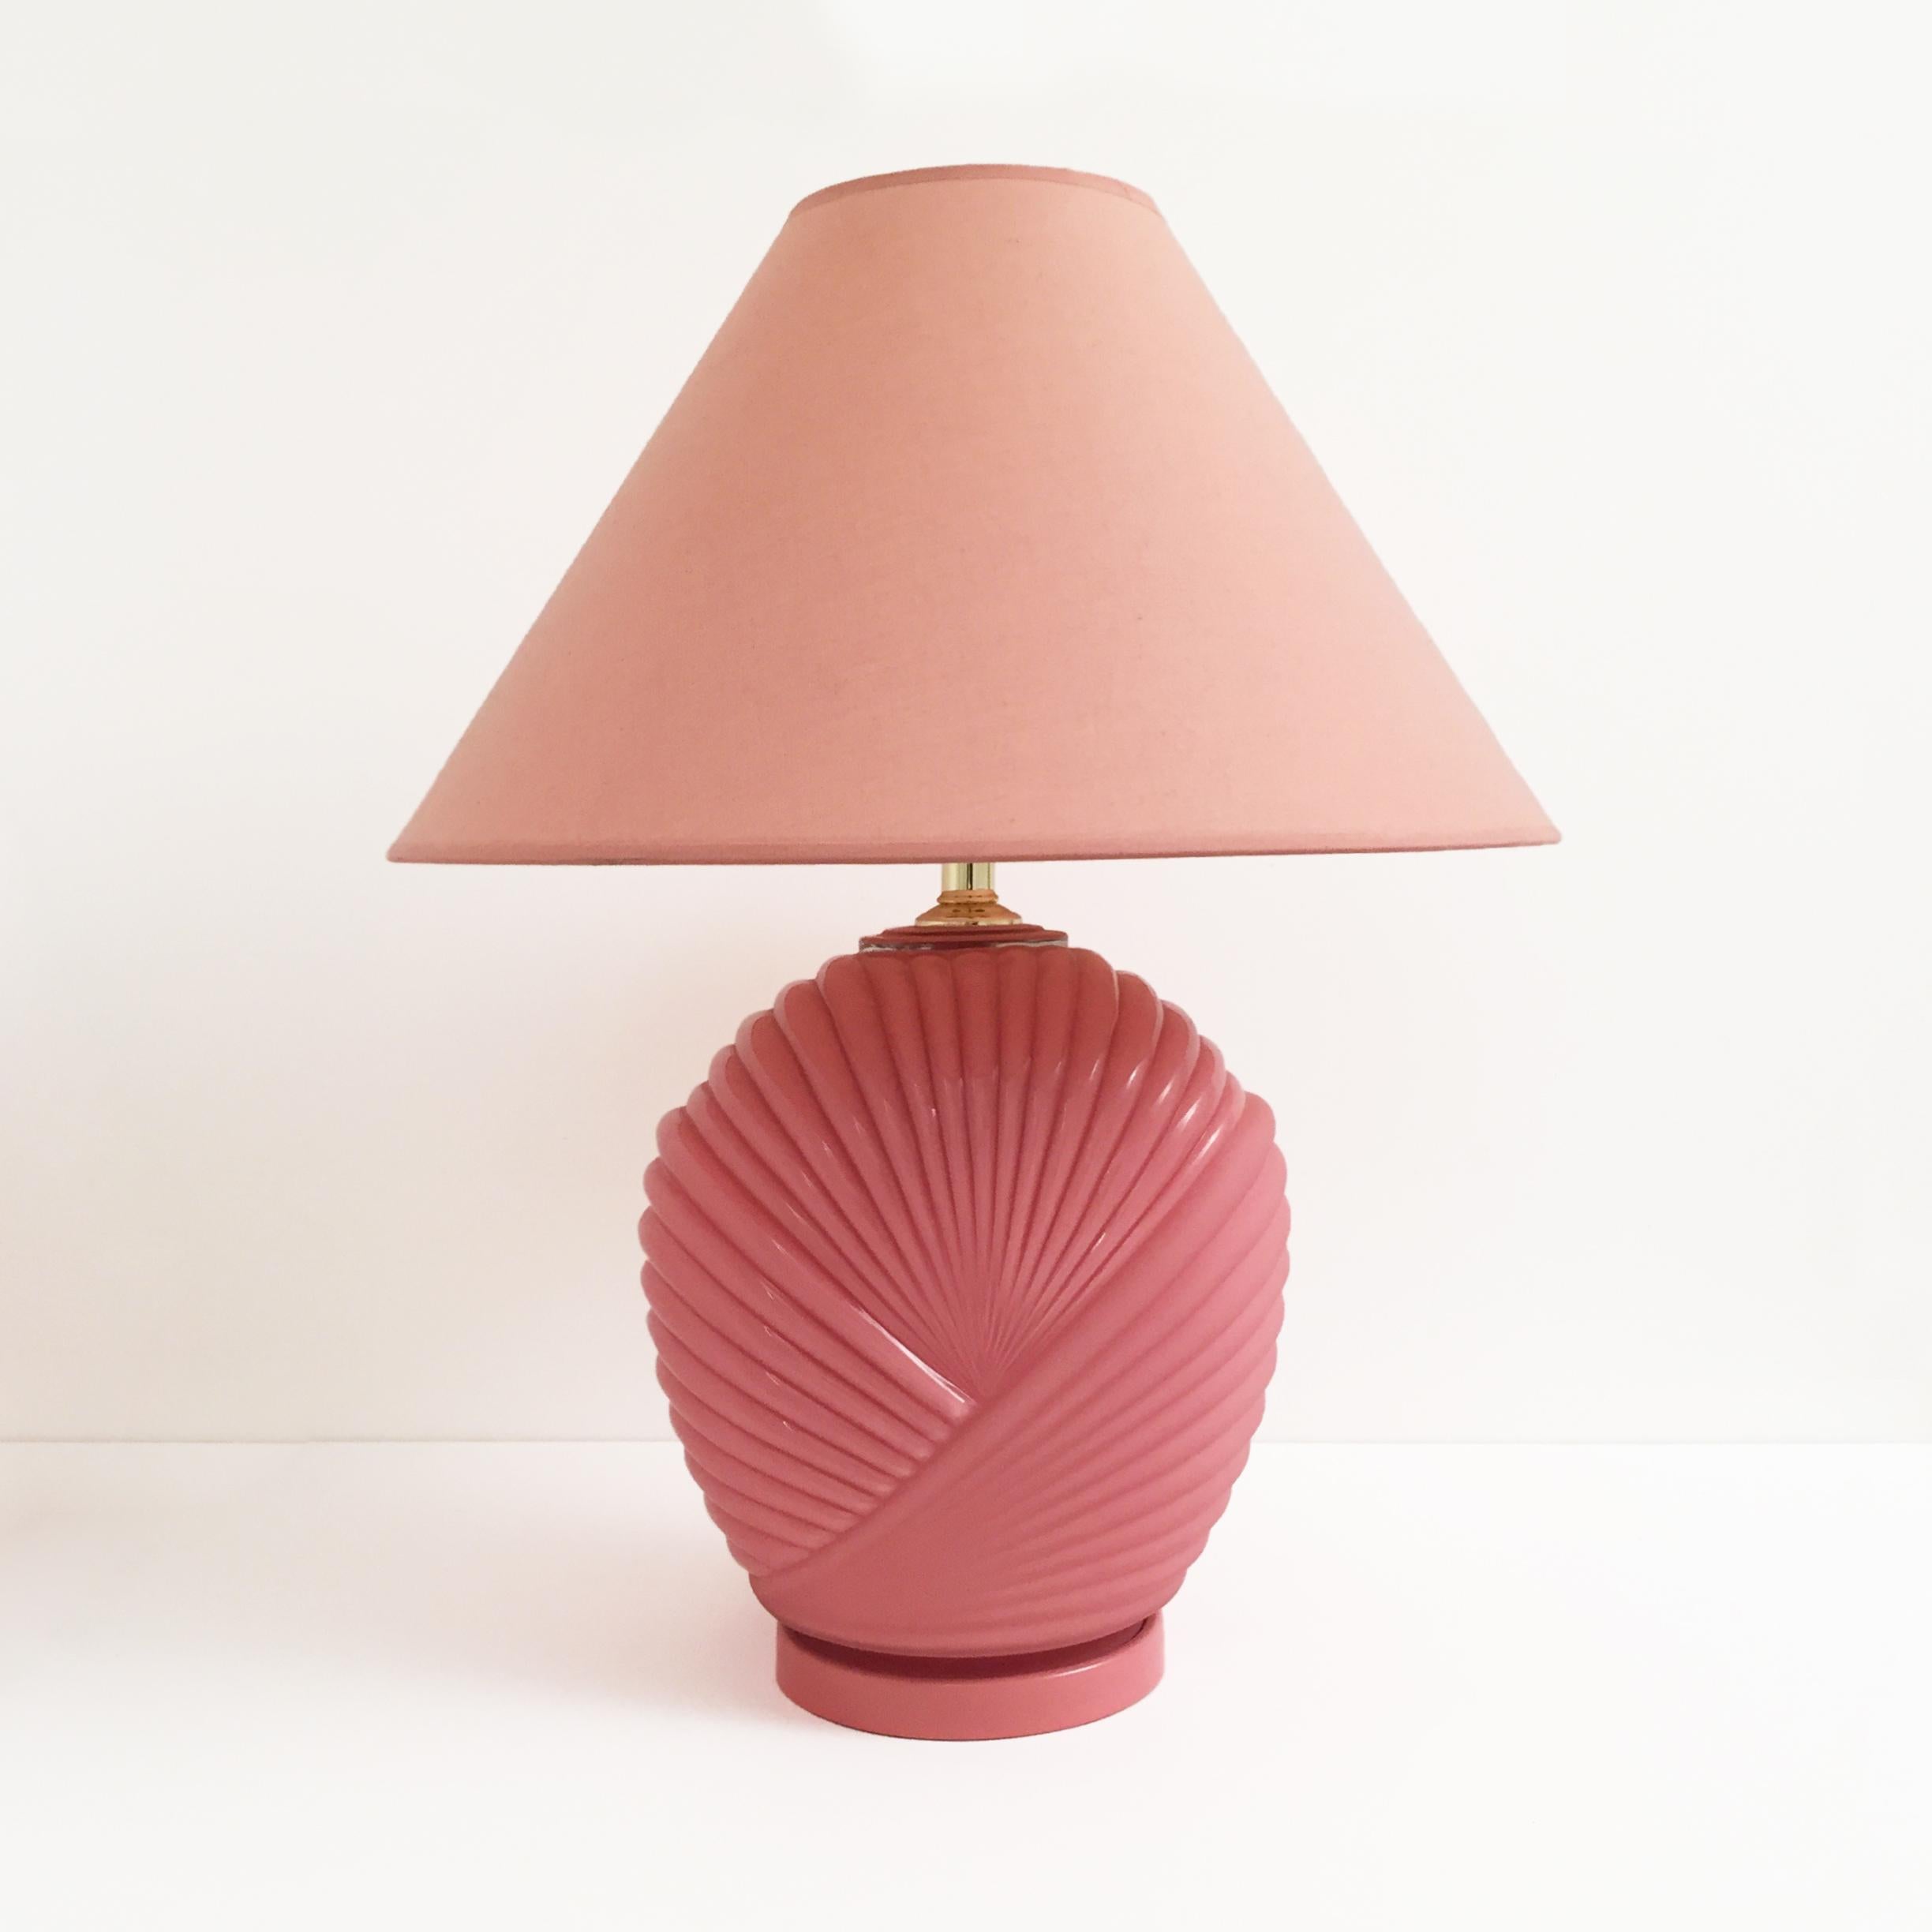 A large romantic 1980s pink candy lamp in smooth and sandblasted glass with its original shade. The glass is painted pink on the inside as well as the metal base. Imported from the USA and its the epitome of Palm Springs post midcentury Classic.